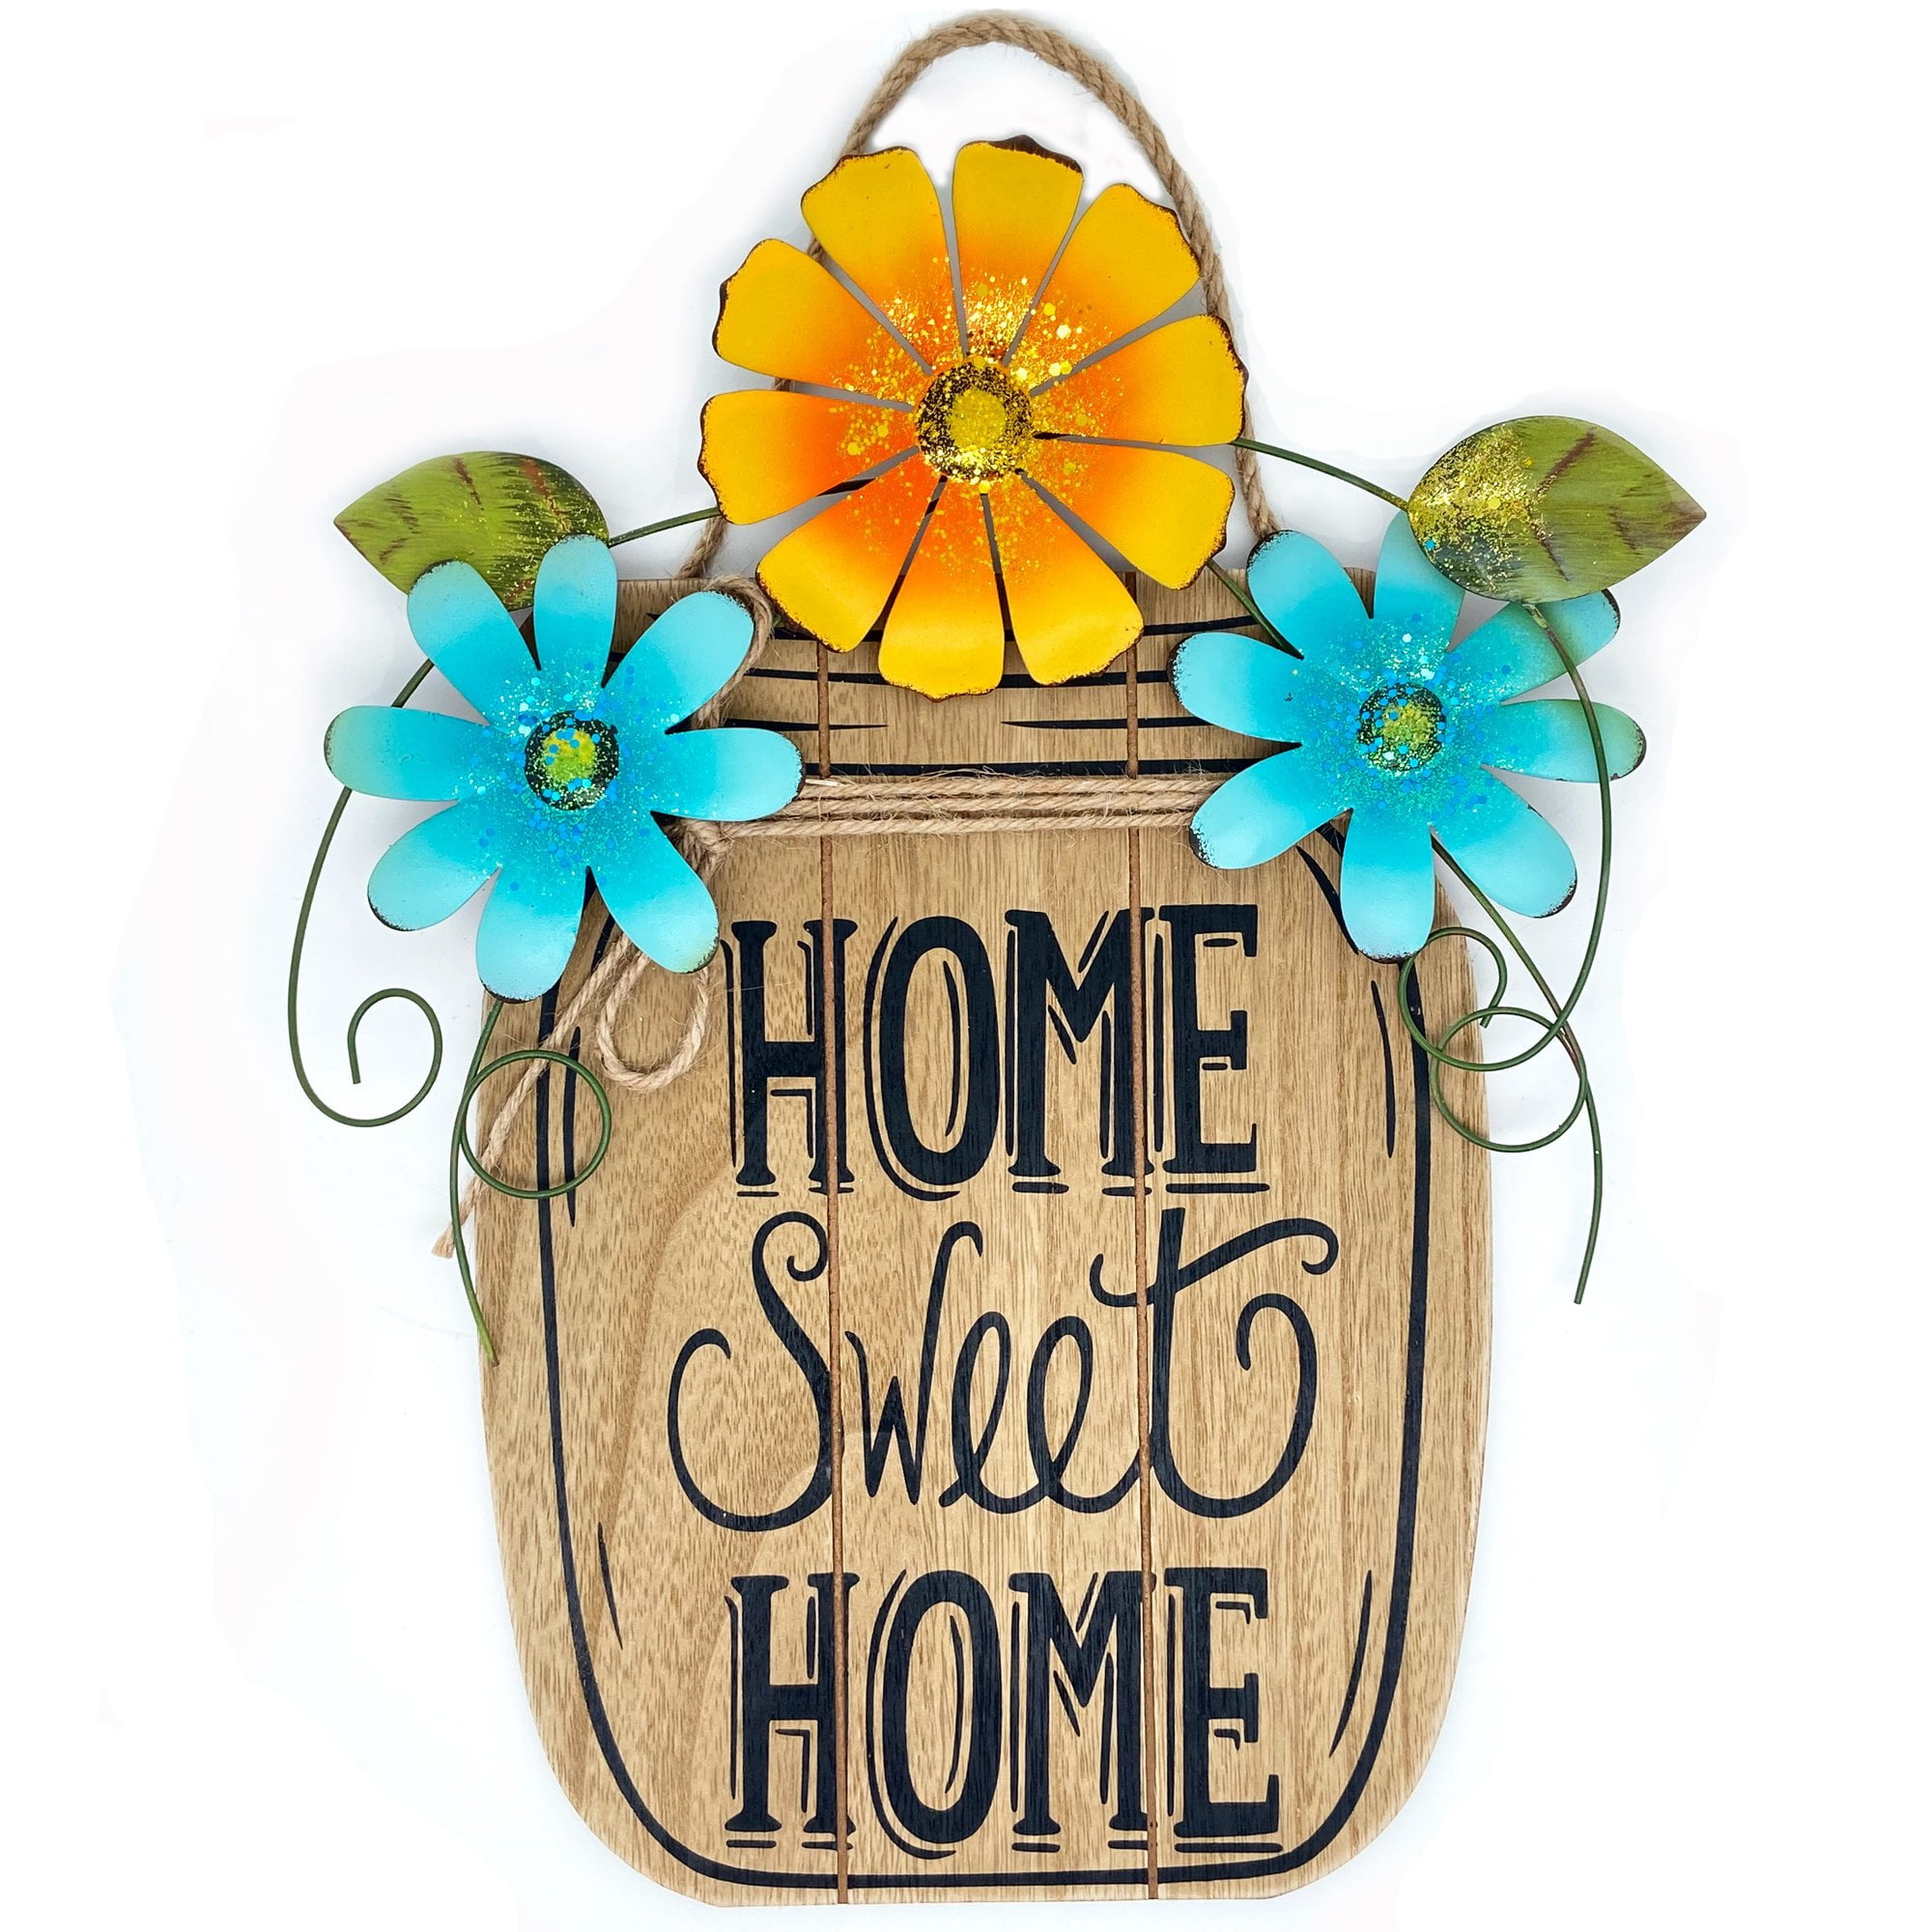 Home Decor Sign home sweet home sign rustic wood signs Home Sweet Home Wood Round circle home sign living room wall decor